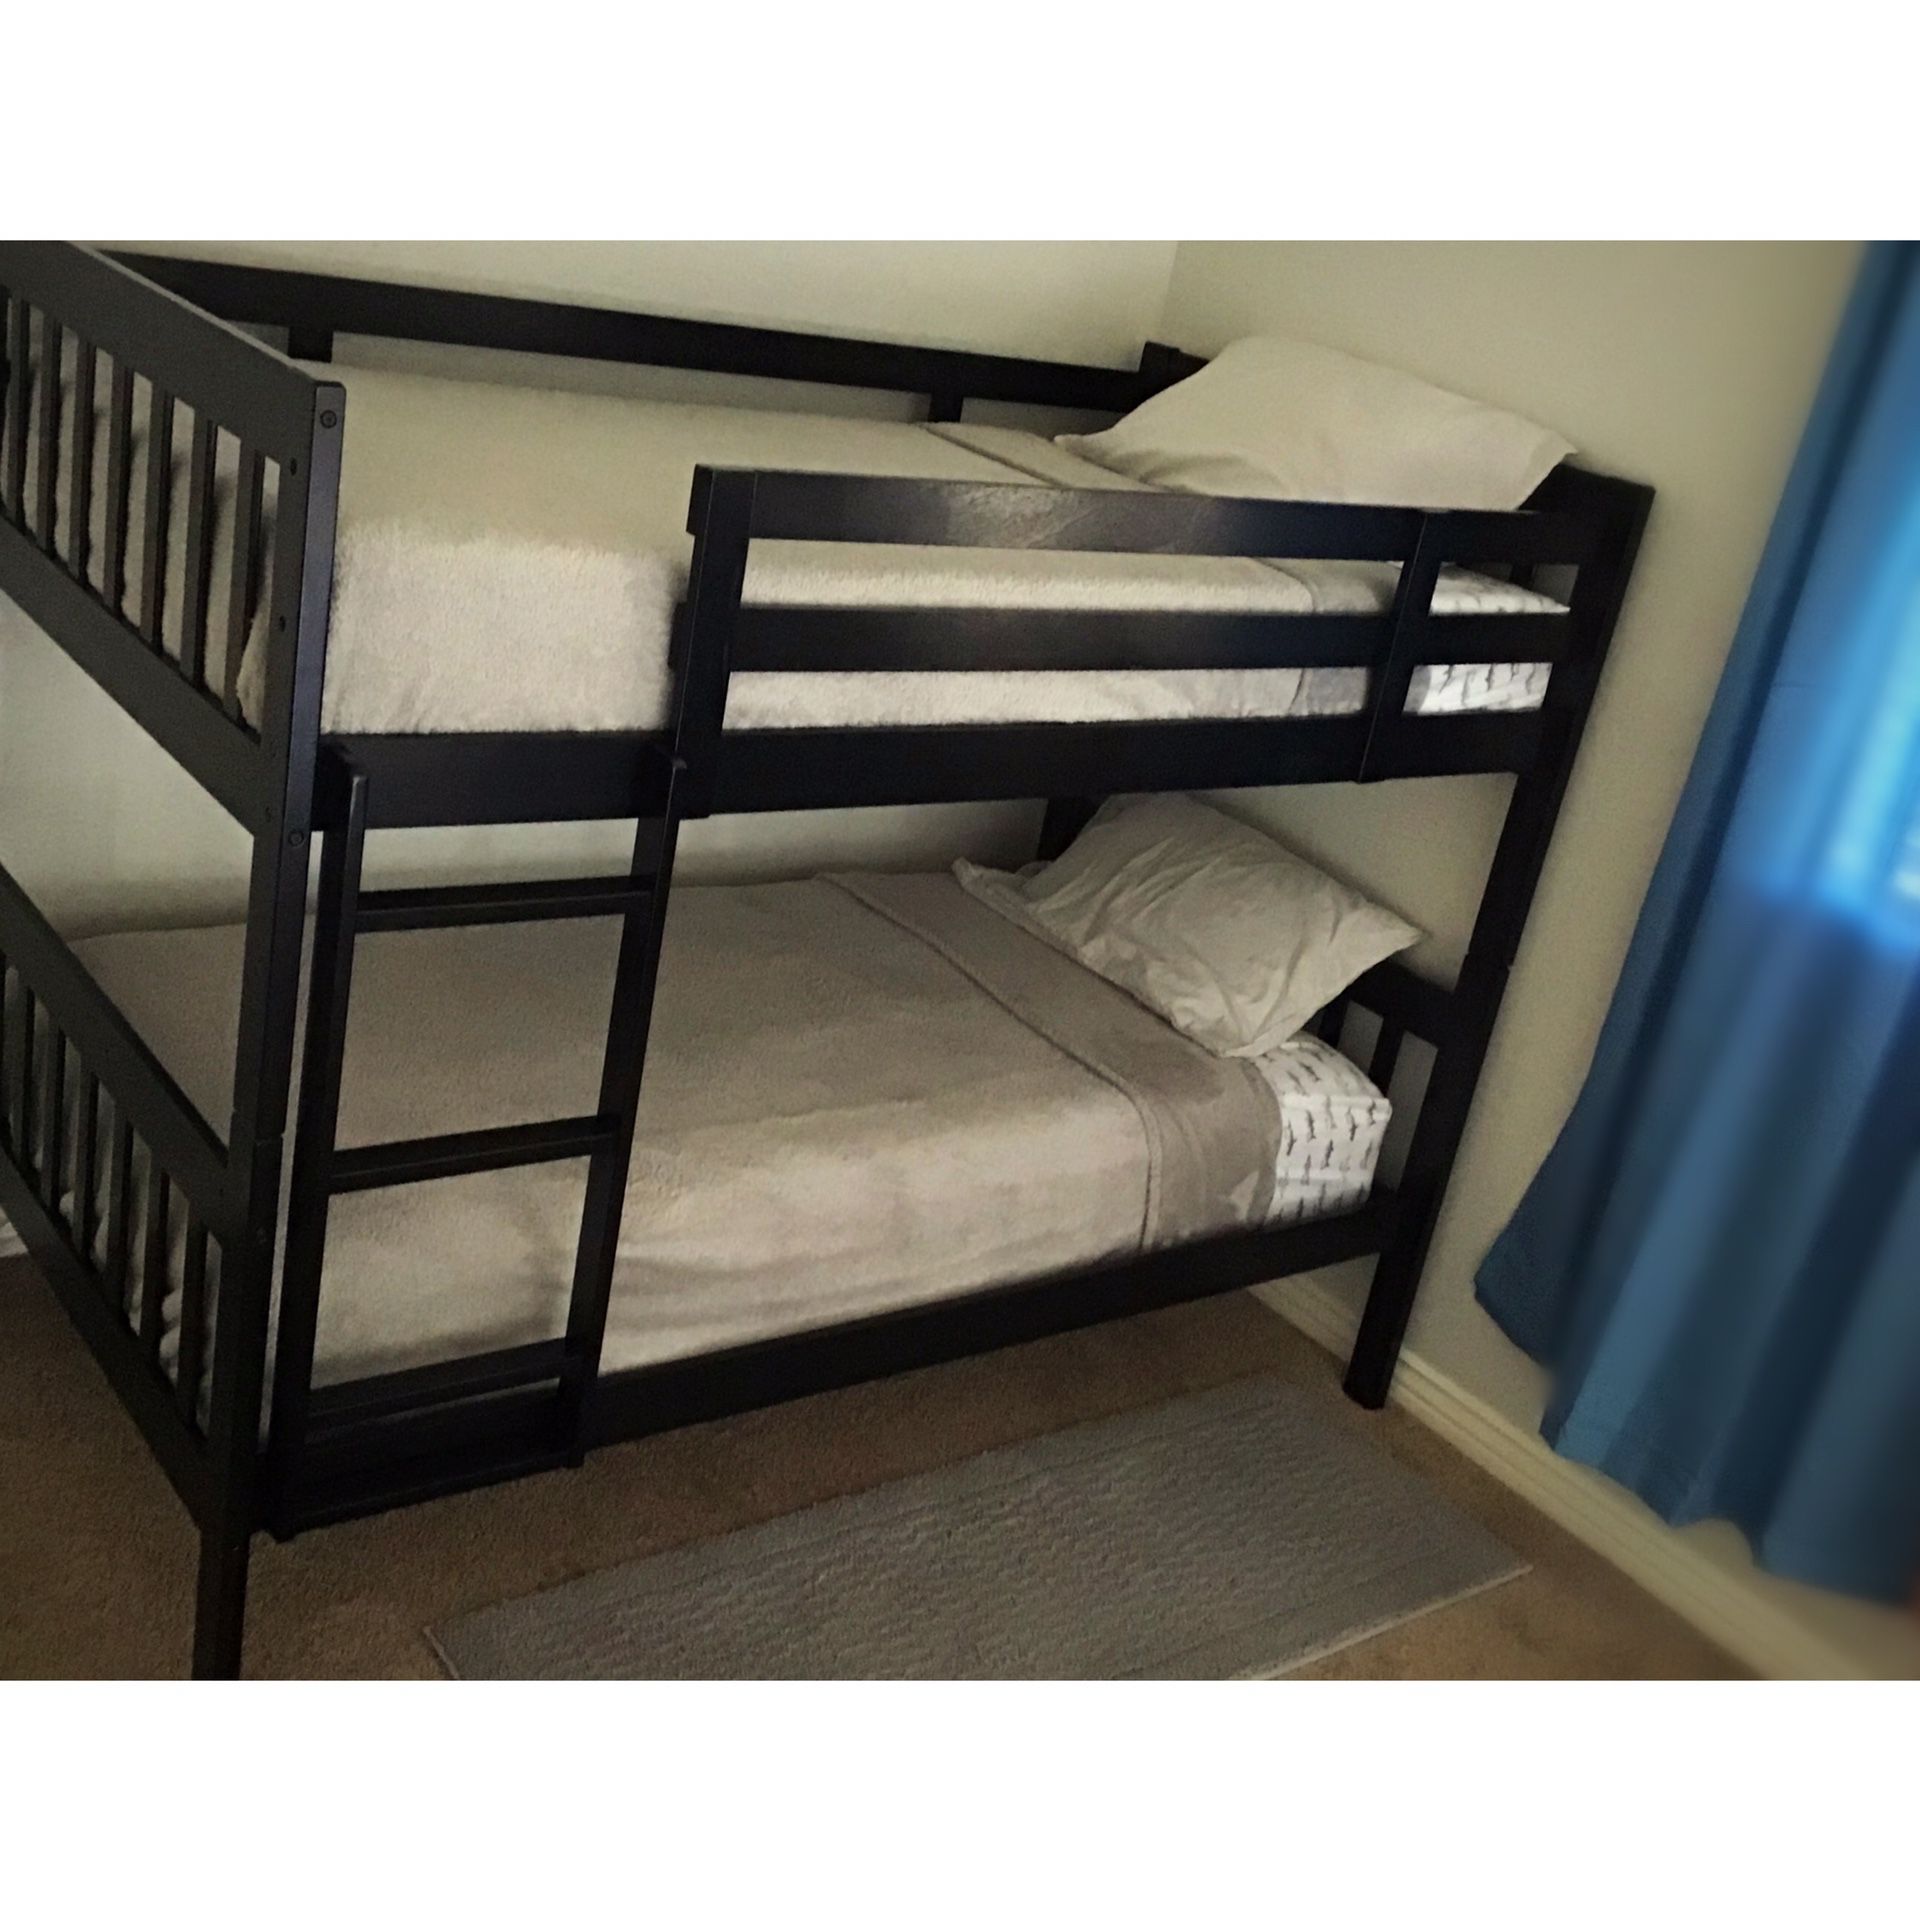 New!! Twin bed, twin bunk bed, bunkbed, twin bunkbed, twin over twin bunkbed , white